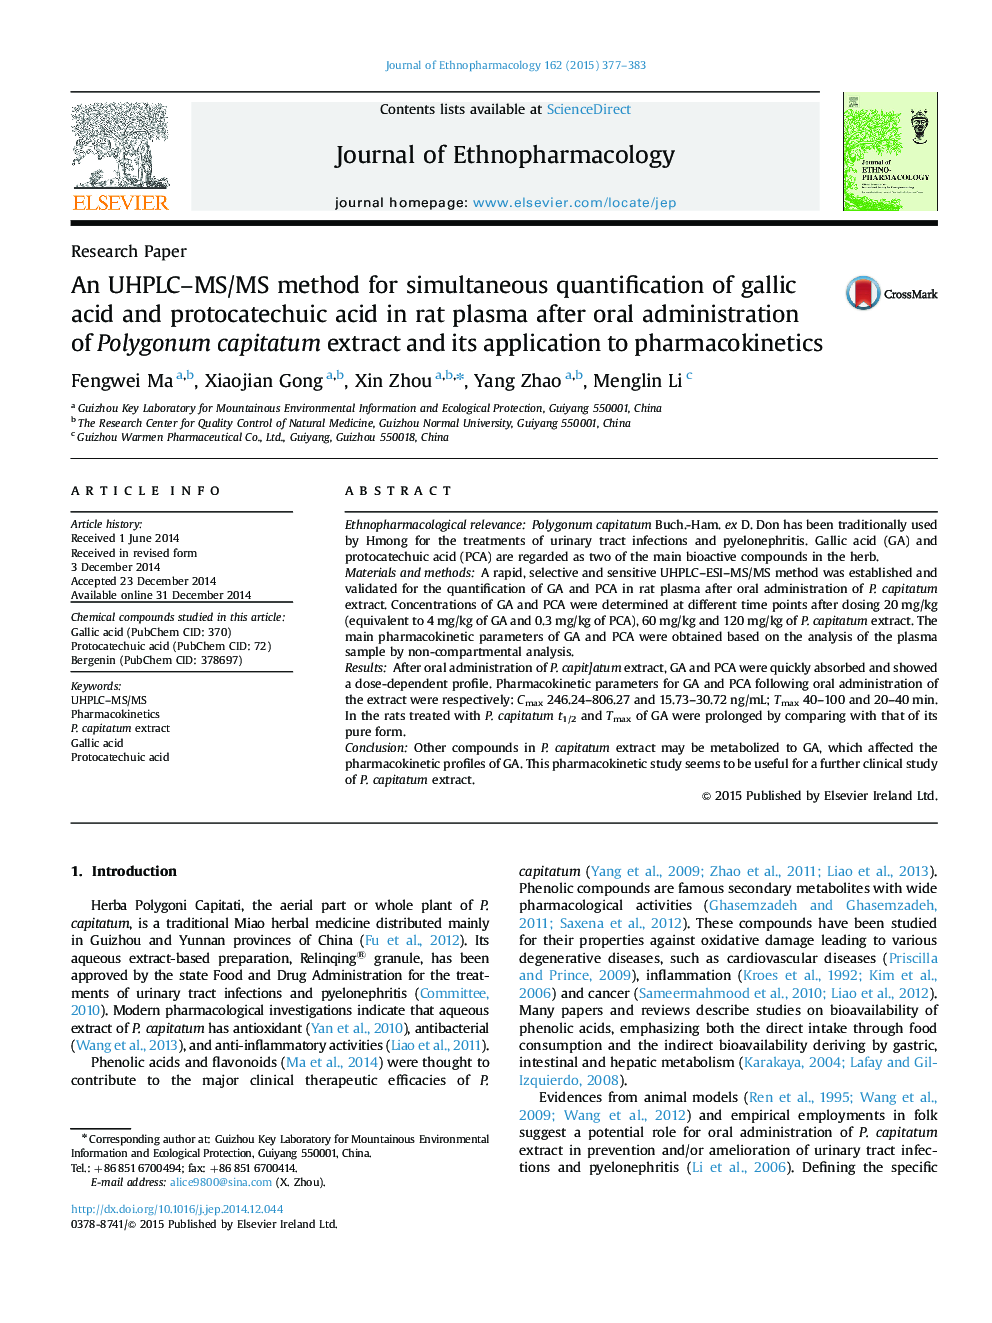 An UHPLC-MS/MS method for simultaneous quantification of gallic acid and protocatechuic acid in rat plasma after oral administration of Polygonum capitatum extract and its application to pharmacokinetics